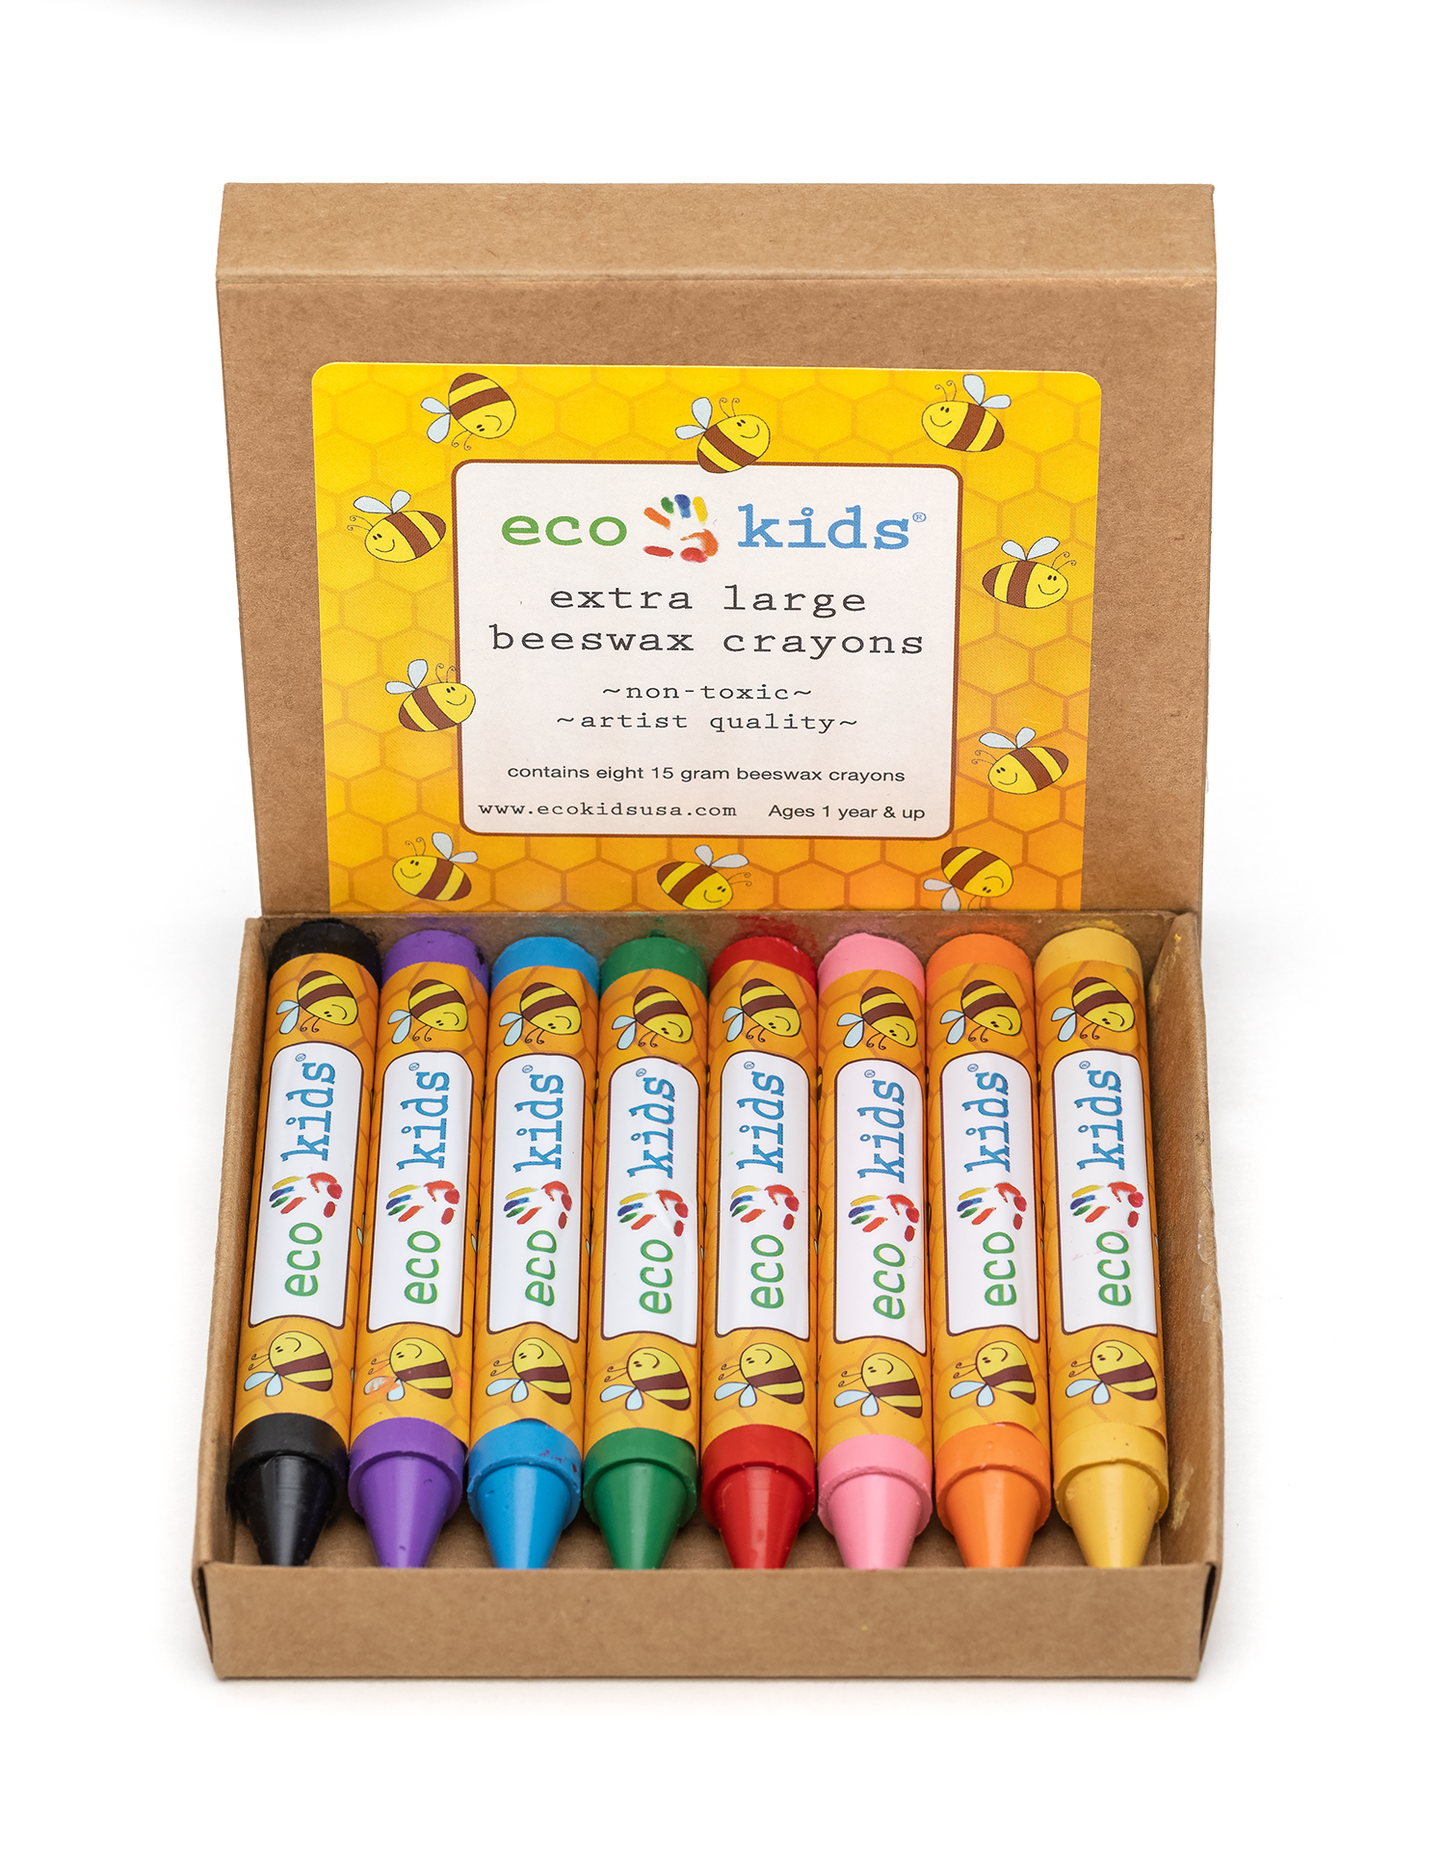 These extra large beeswax crayons are carefully blended to glide on paper and provide rich color and smooth texture. Beeswax, an all-natural, renewable, and eco-friendly resource helps to insure that our crayons are safe and fun for children of all ages.